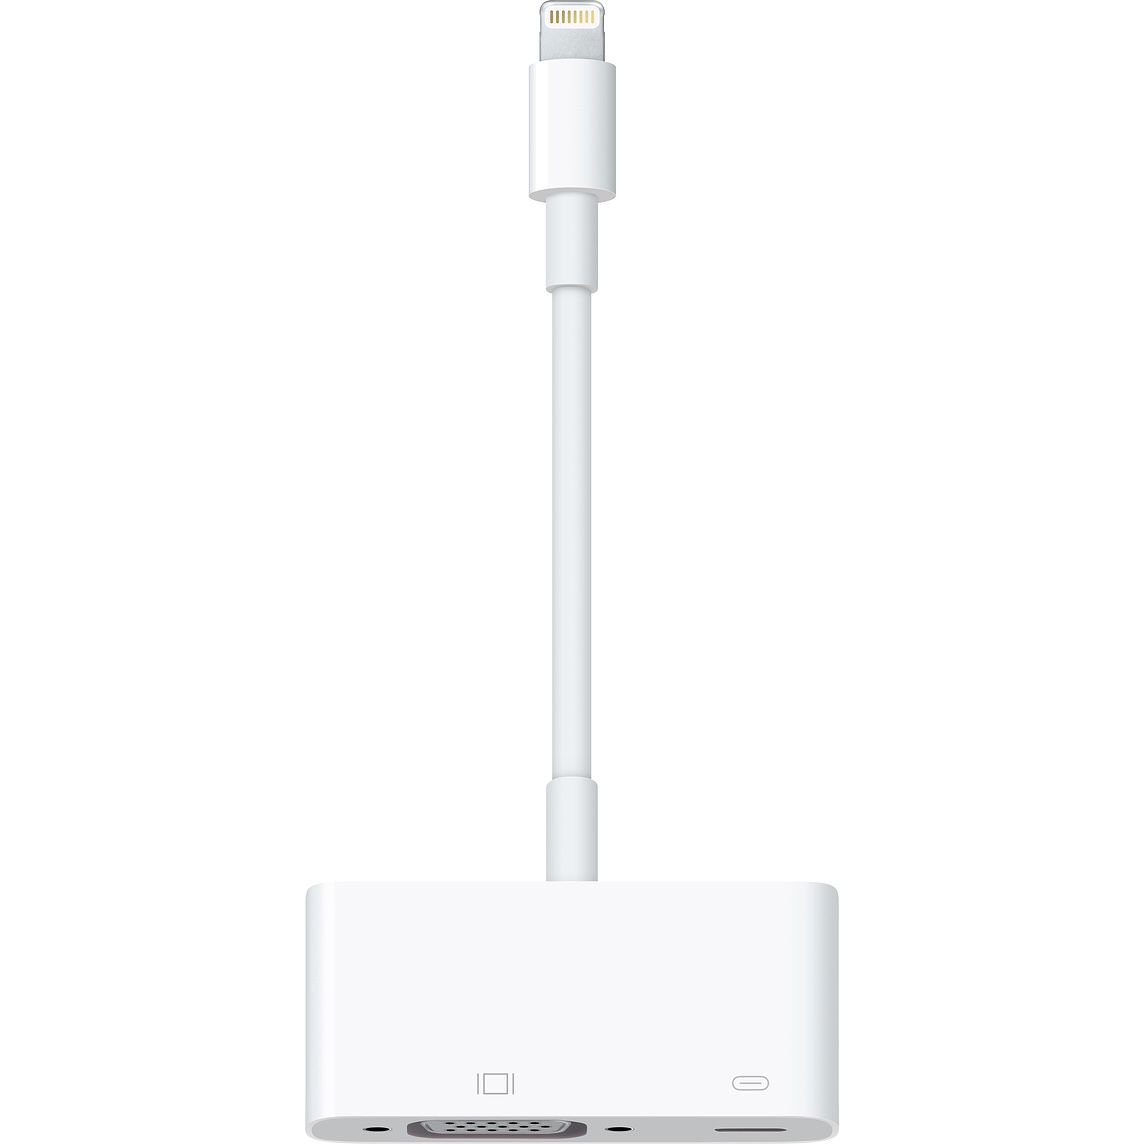 Apple VGA to lightning cable. Stream your iPad or iPhone to a tv or computer.